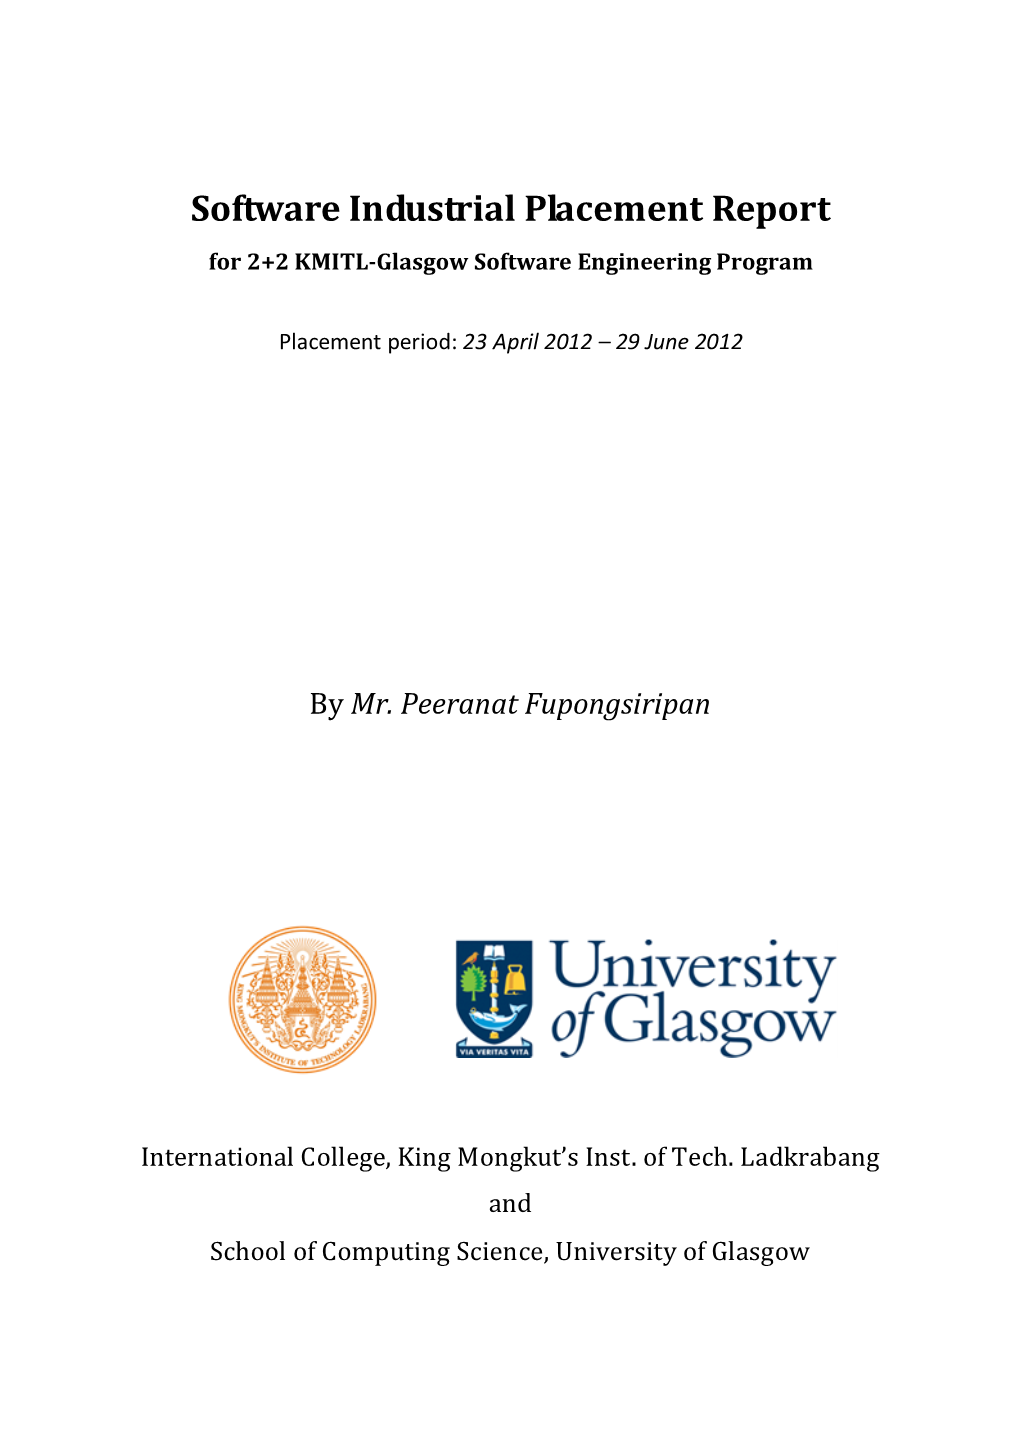 Software Industrial Placement Report for 2+2 KMITL-Glasgow Software Engineering Program